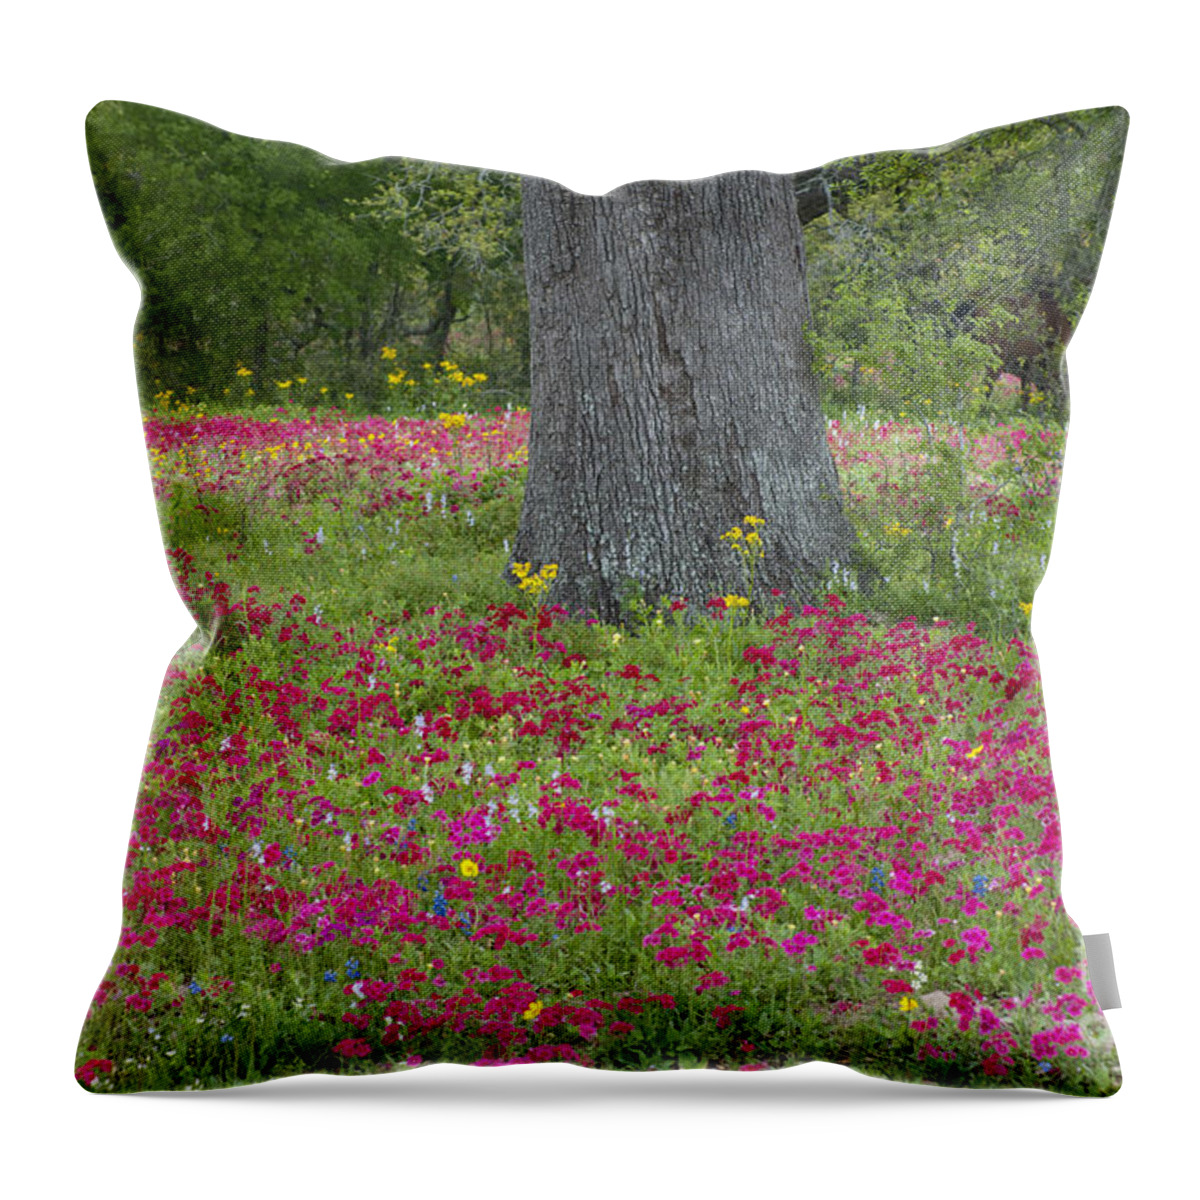 Landscape; Texas; Wildflowers; Crown Tickweed; Drummonds Phlox; Red; Oak Tree; North America; Dave Welling; Photograph; Spring; Fresh; Flowers;landscape; Nature; Scenic; Flora; Native Plants Throw Pillow featuring the photograph Drummonds Phlox and Crown Tickweed Central Texas by Dave Welling